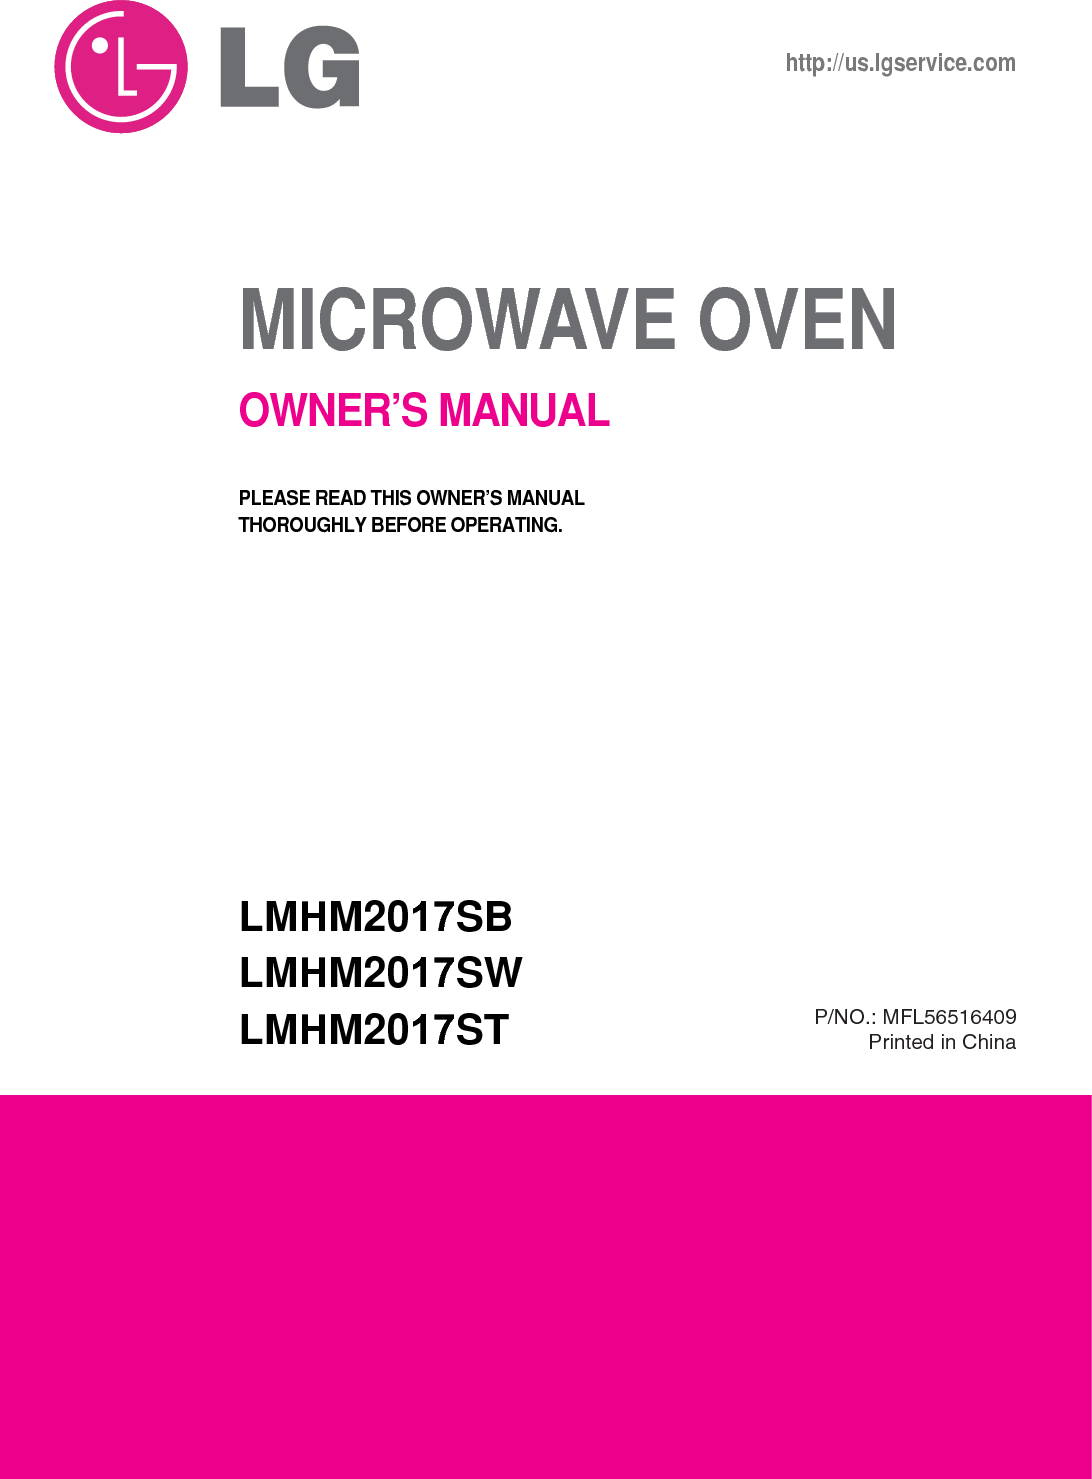 MICROWAVE OVENOWNER’S MANUALLMHM2017SBLMHM2017SWLMHM2017SThttp://us.lgservice.comPLEASE READ THIS OWNER’S MANUAL THOROUGHLY BEFORE OPERATING.P/NO.: MFL56516409Printed in China